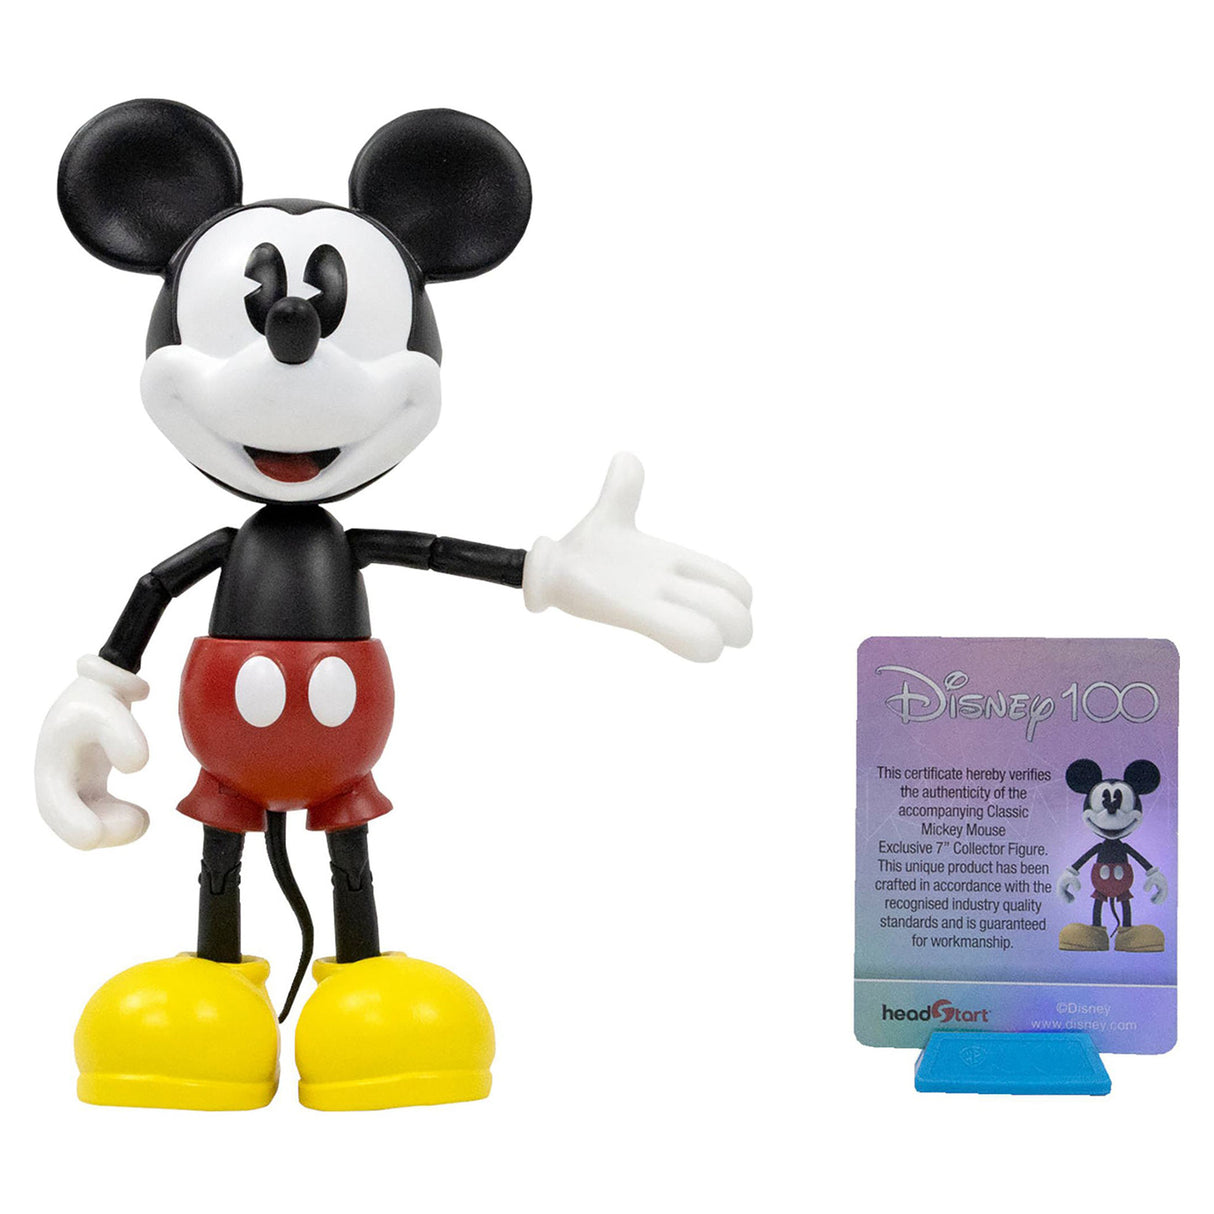 Disney 100 Collector Figure - Classic Mickey Mouse (6 inches)